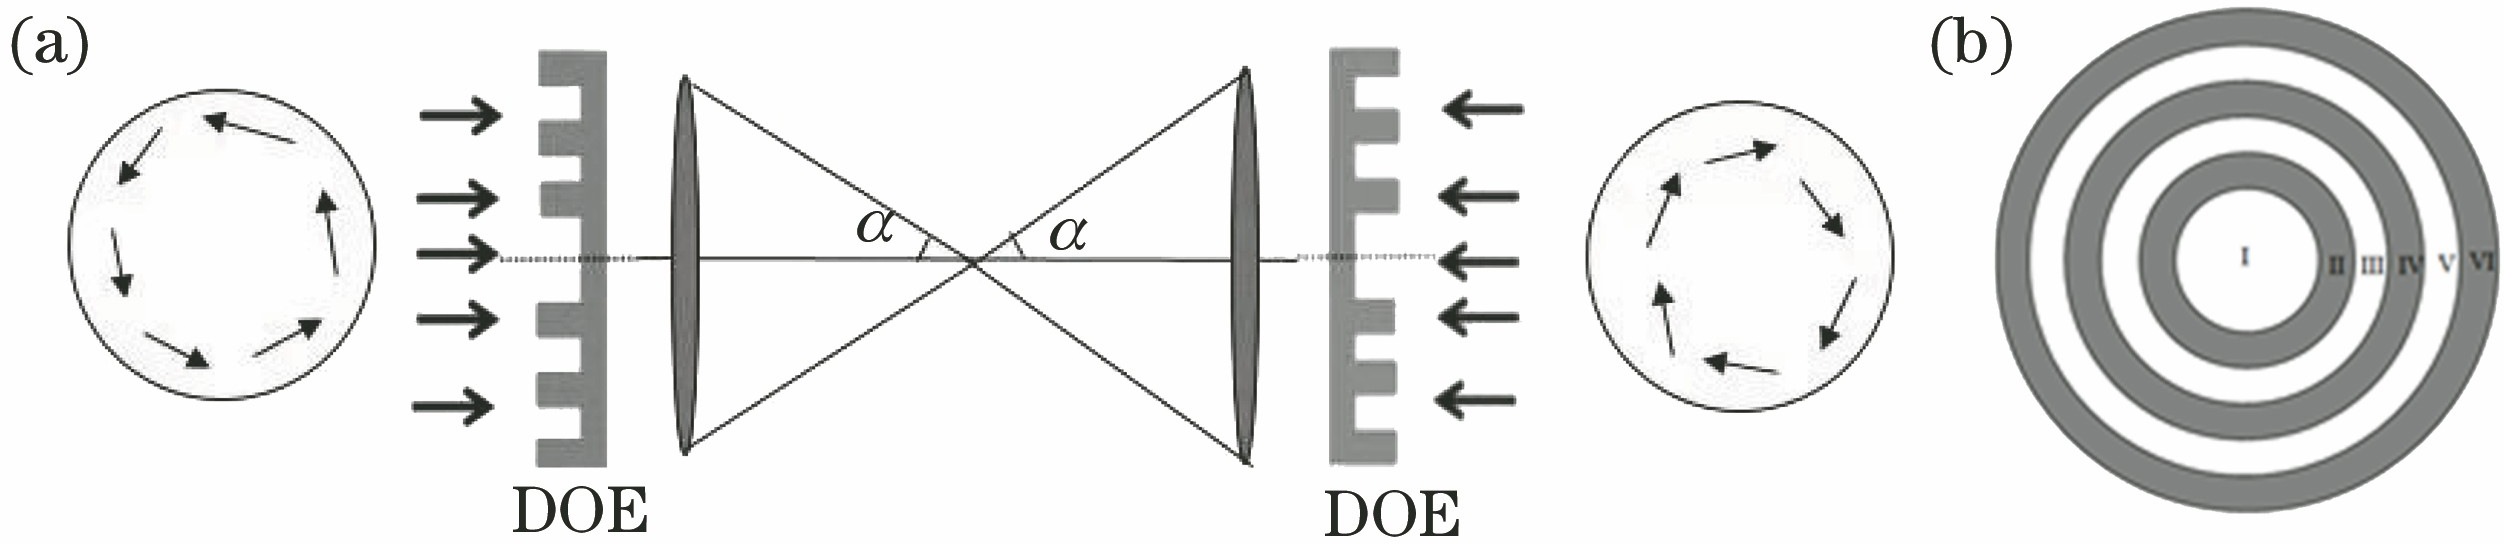 Schematic of 4pi focusing optical system. (a) Tightly focusing optical system; (b) structure of DOE